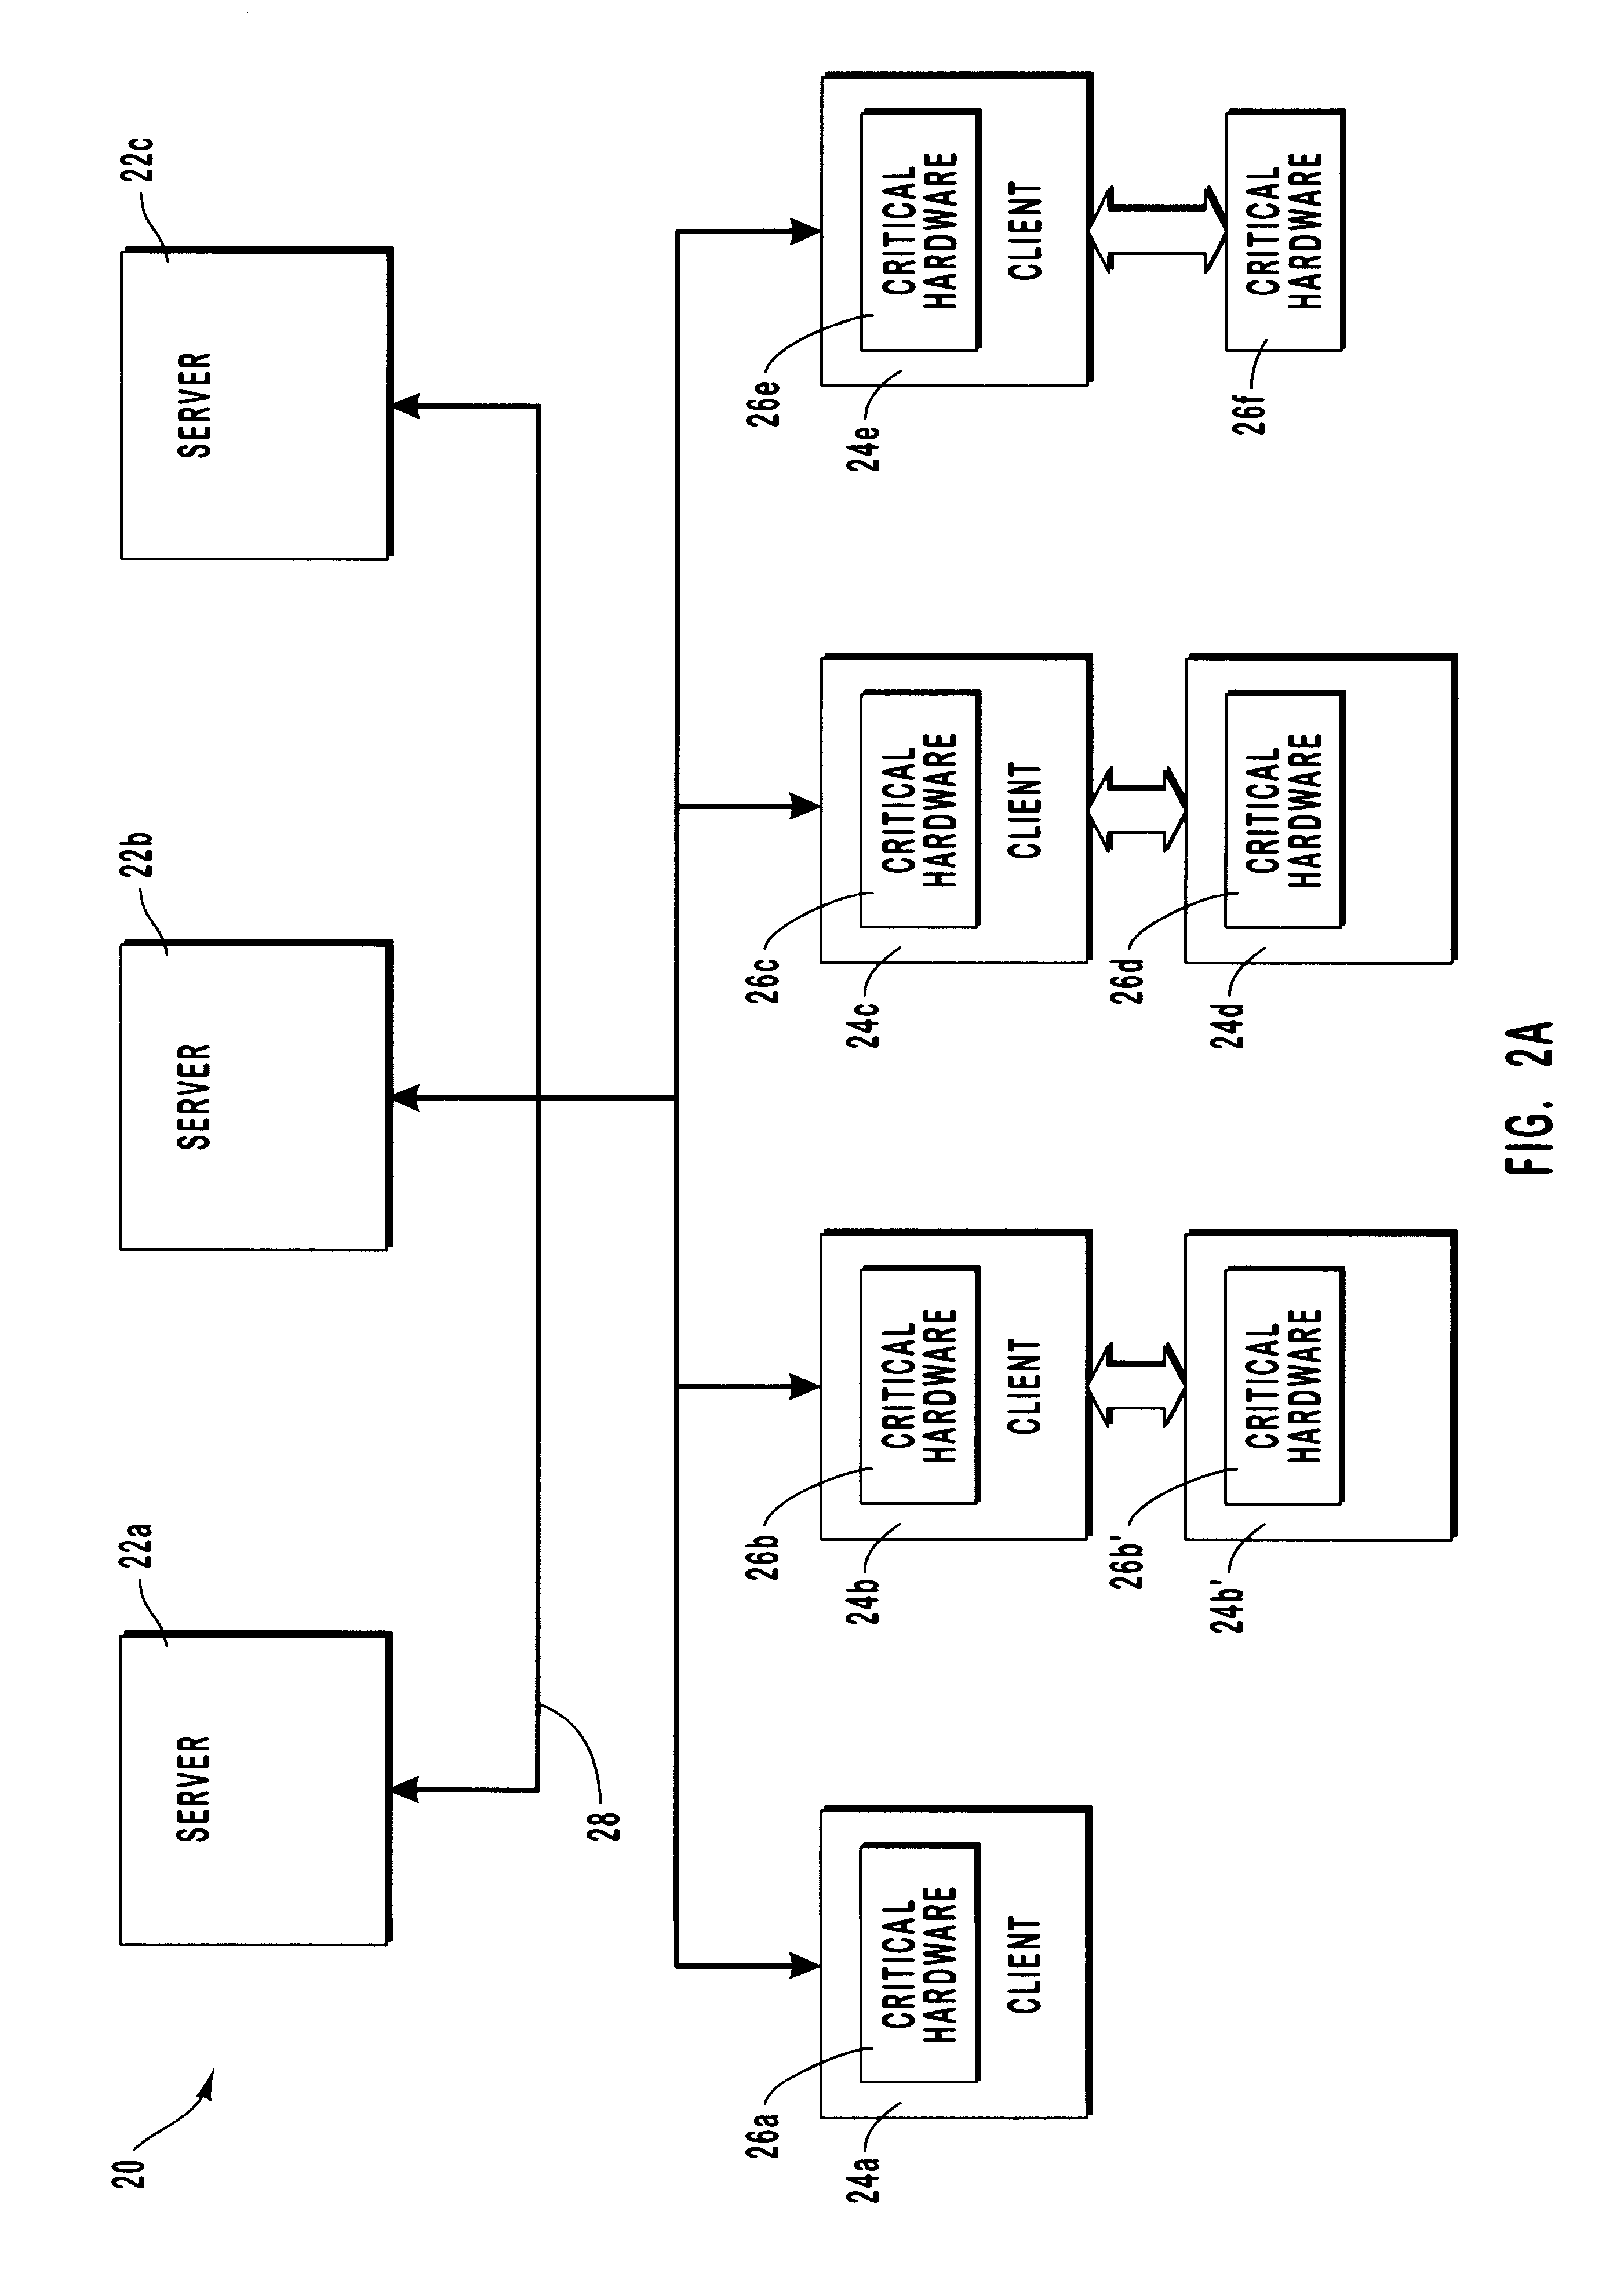 Correcting for changed client machine hardware when using a server-based operating system